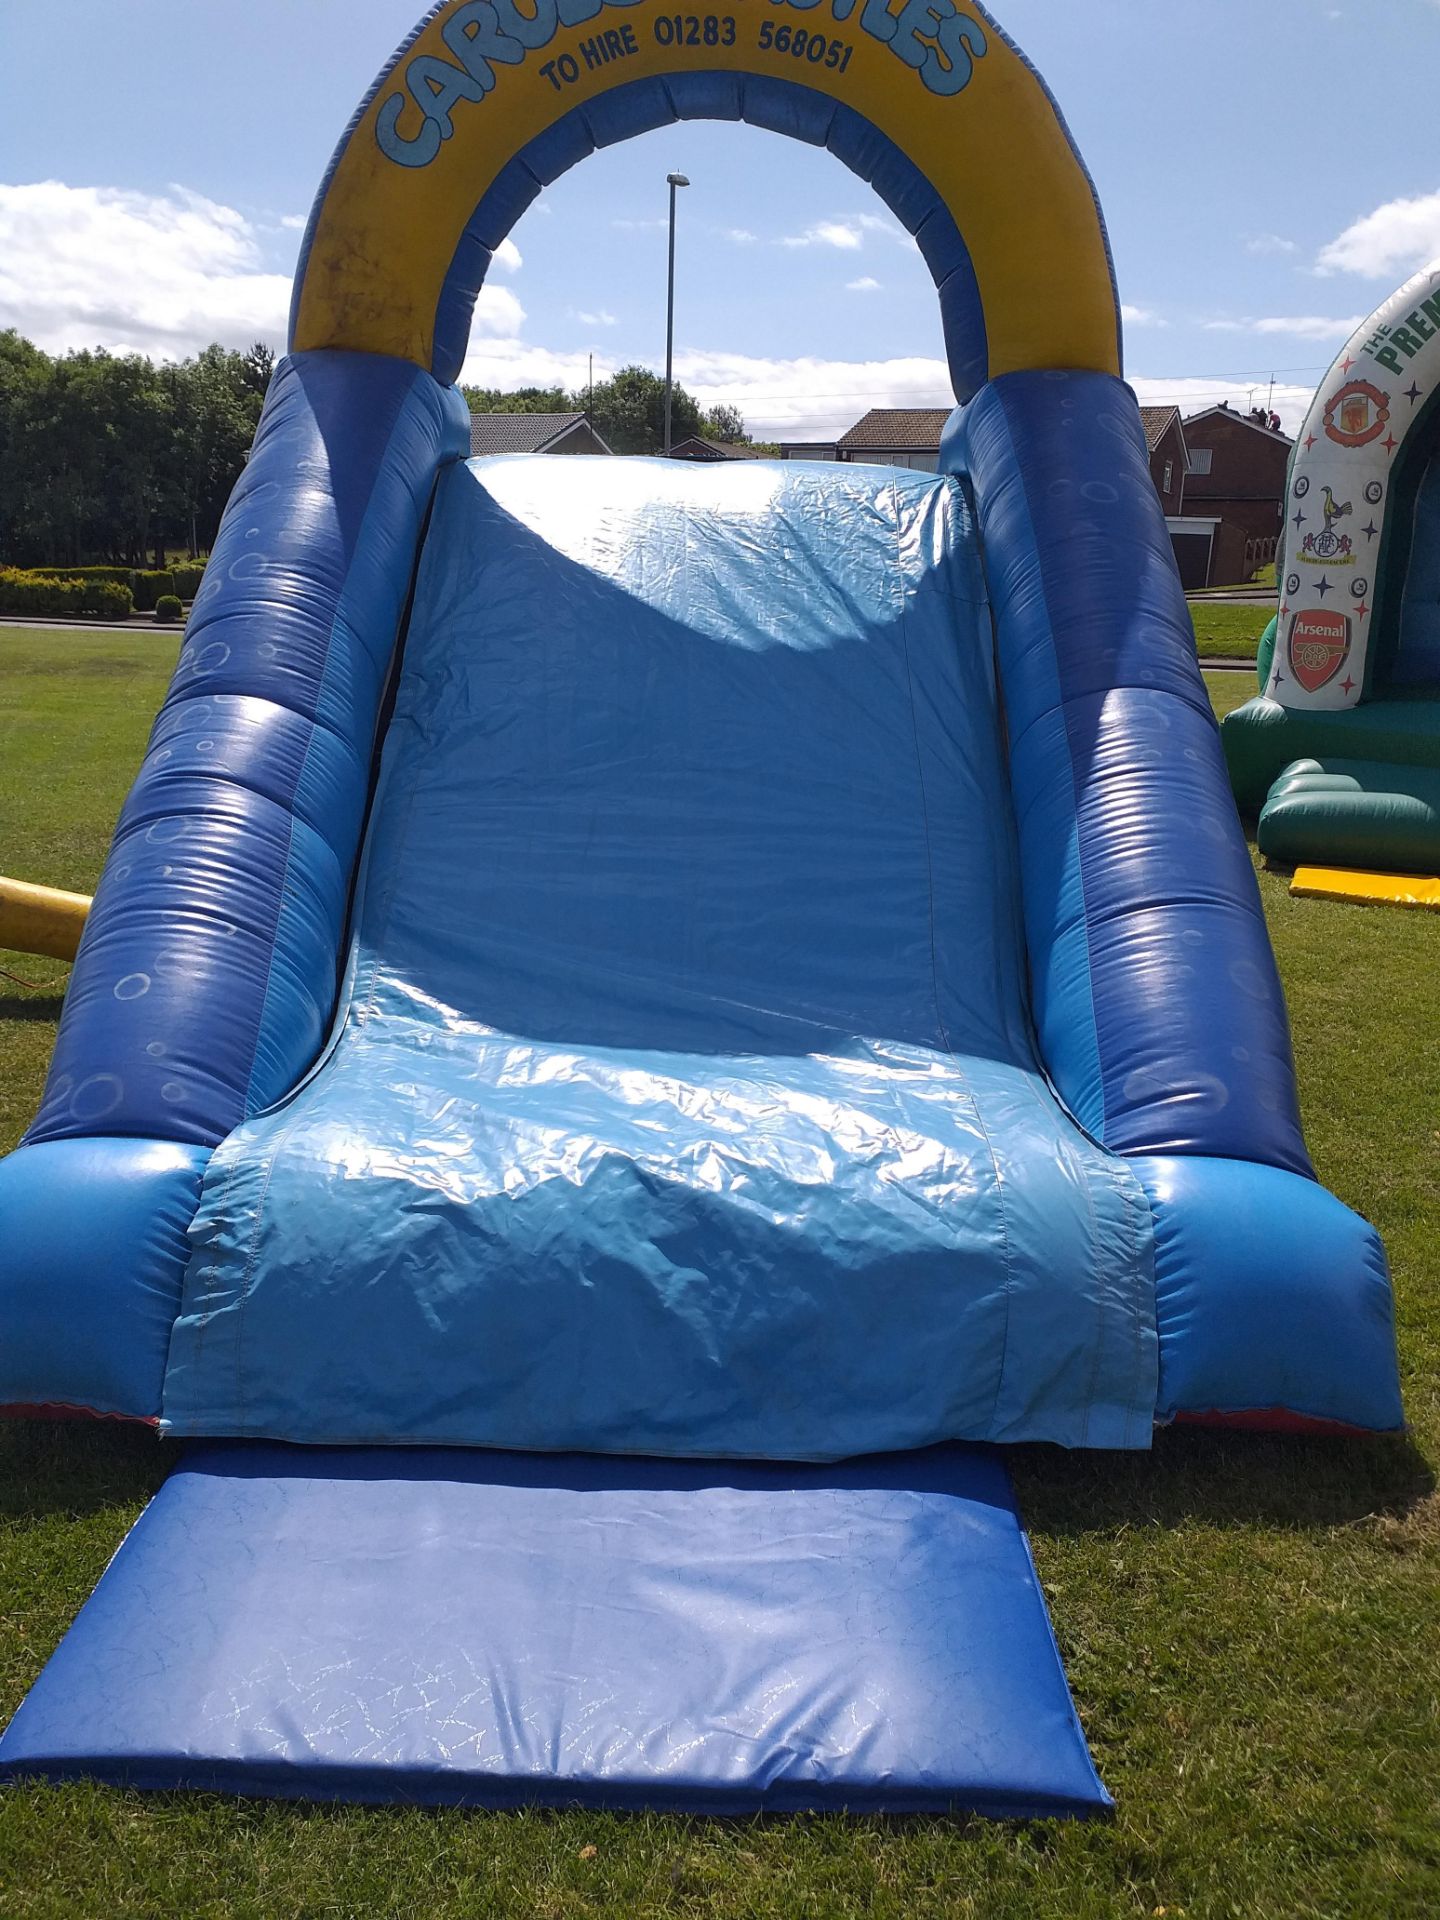 Bouncy Castle 12ft by 17ft With Blower - Image 2 of 2